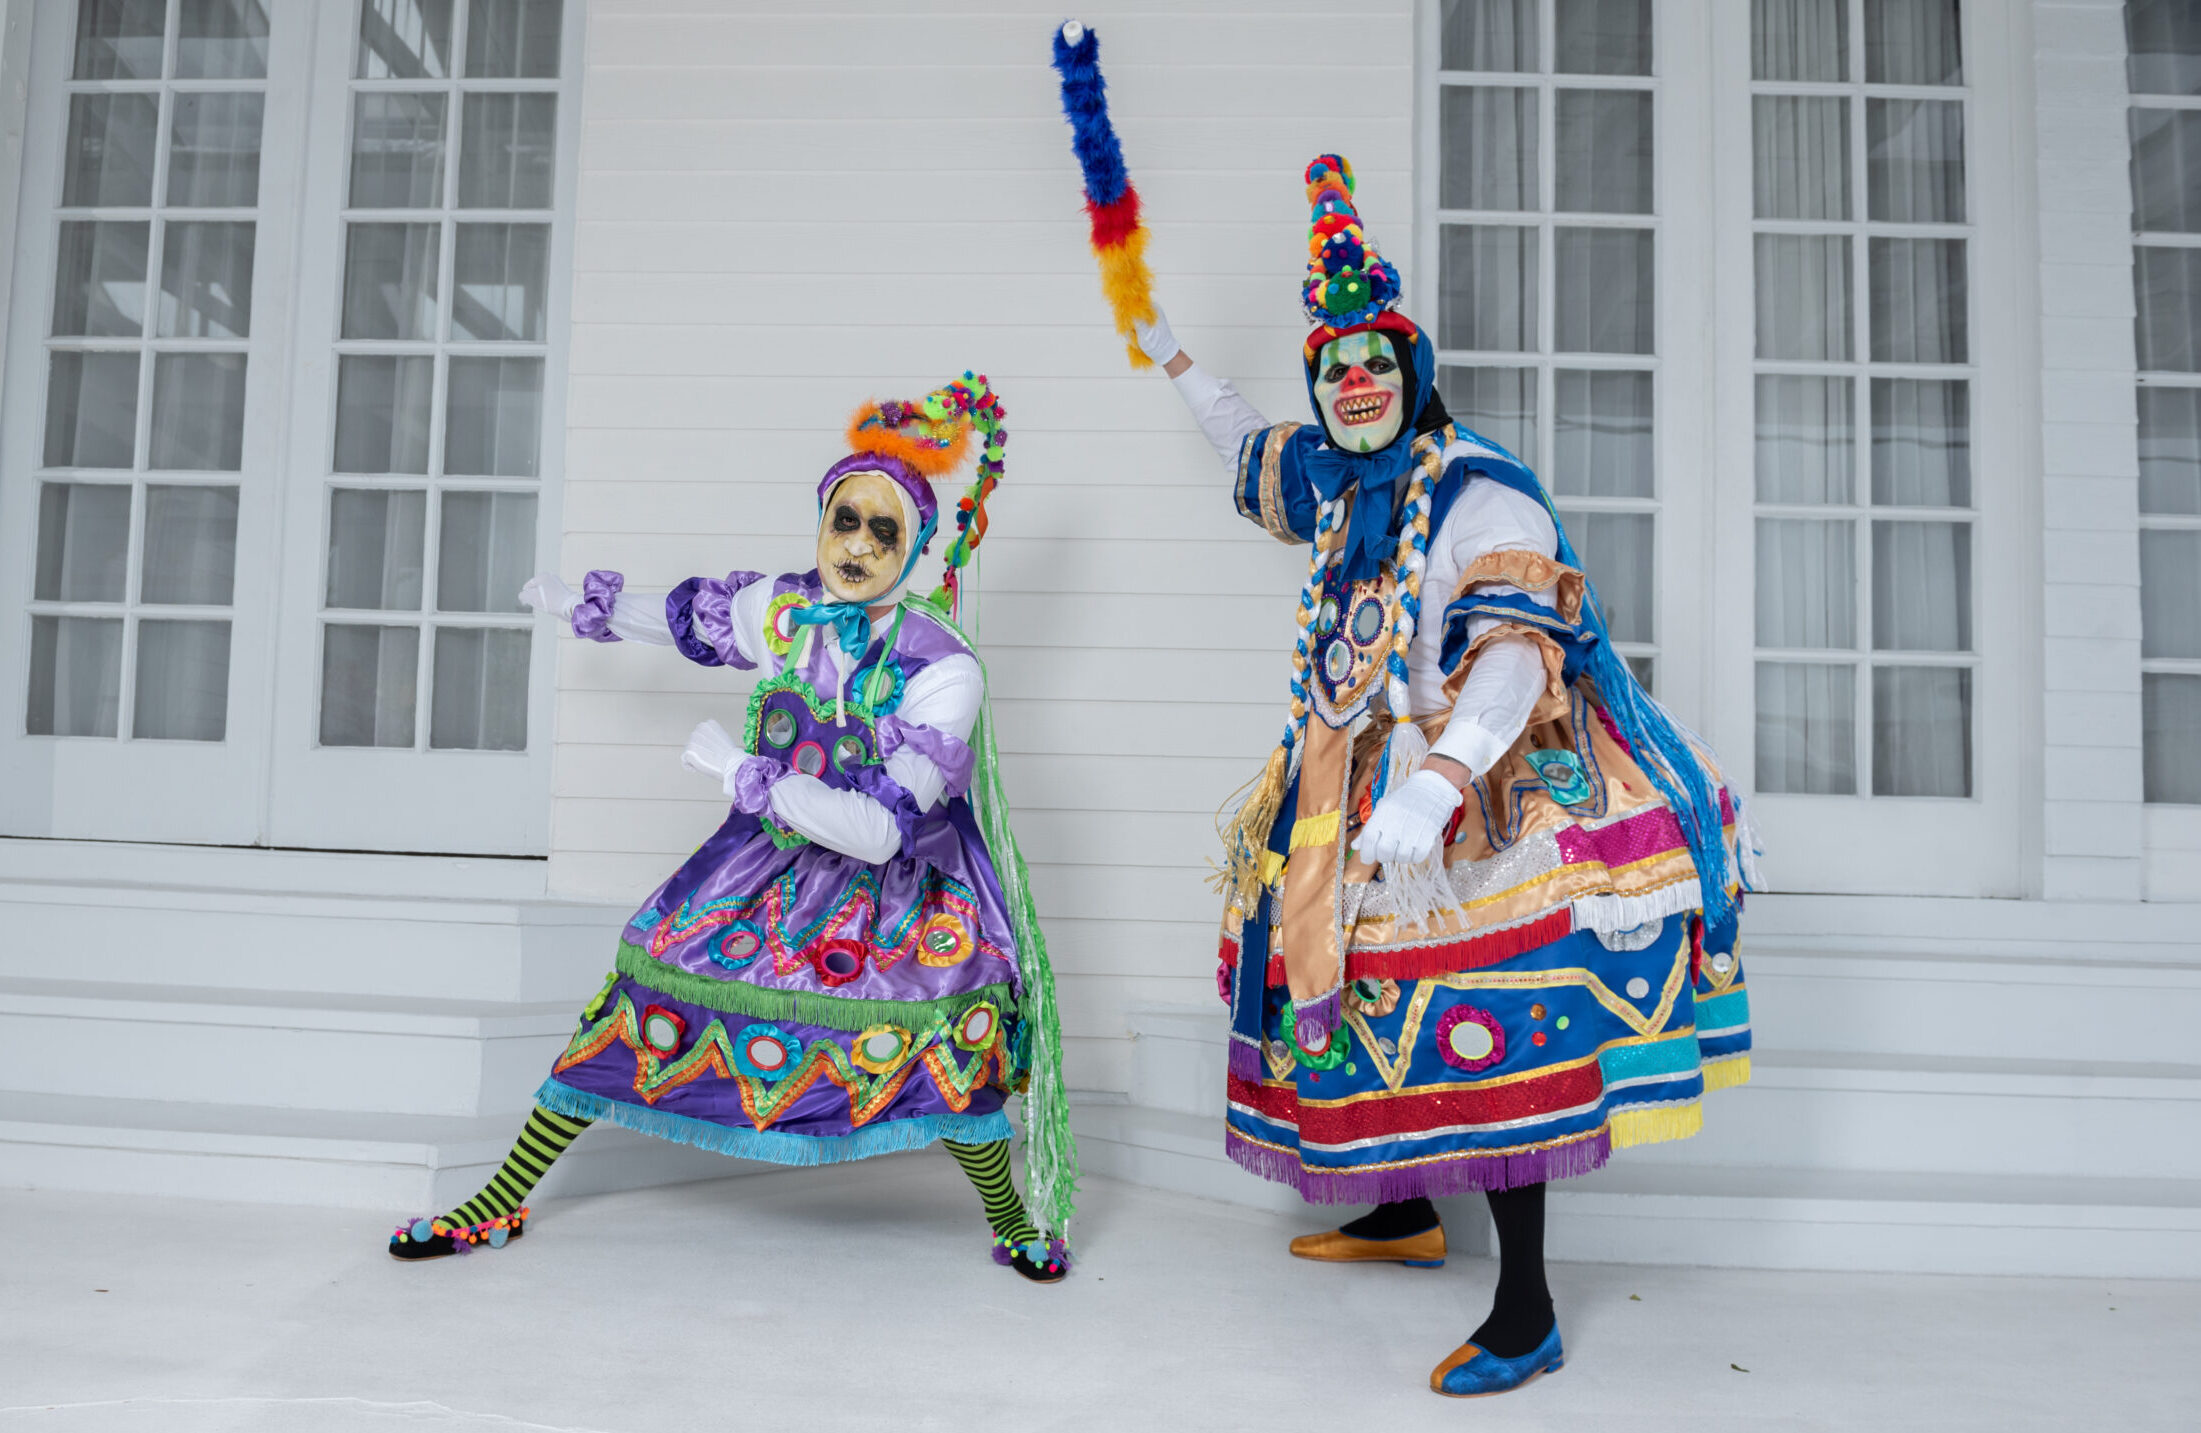 Two dancers in colorful tops and hooped skirts adorned in small mirrors pose for a photo. They have masks resembling clowns and elaborate headpieces with a colorful tail protruding from the tops of their heads.